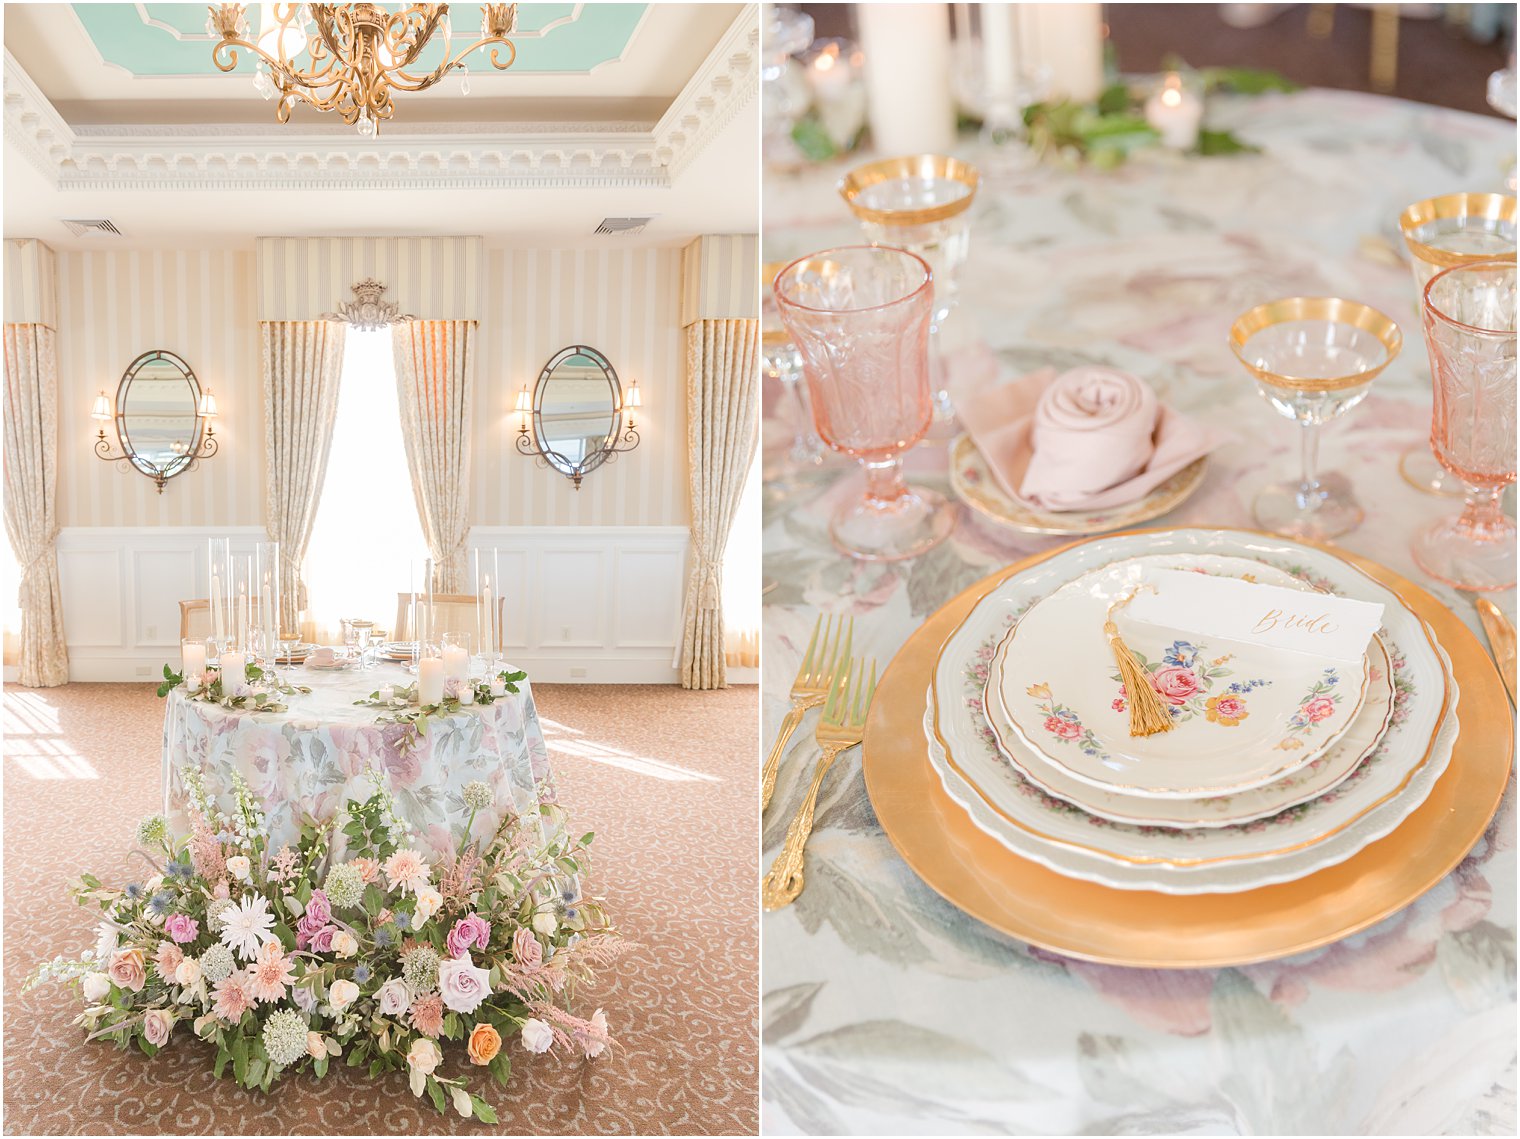 sweetheart table with pink and white flowers at base 